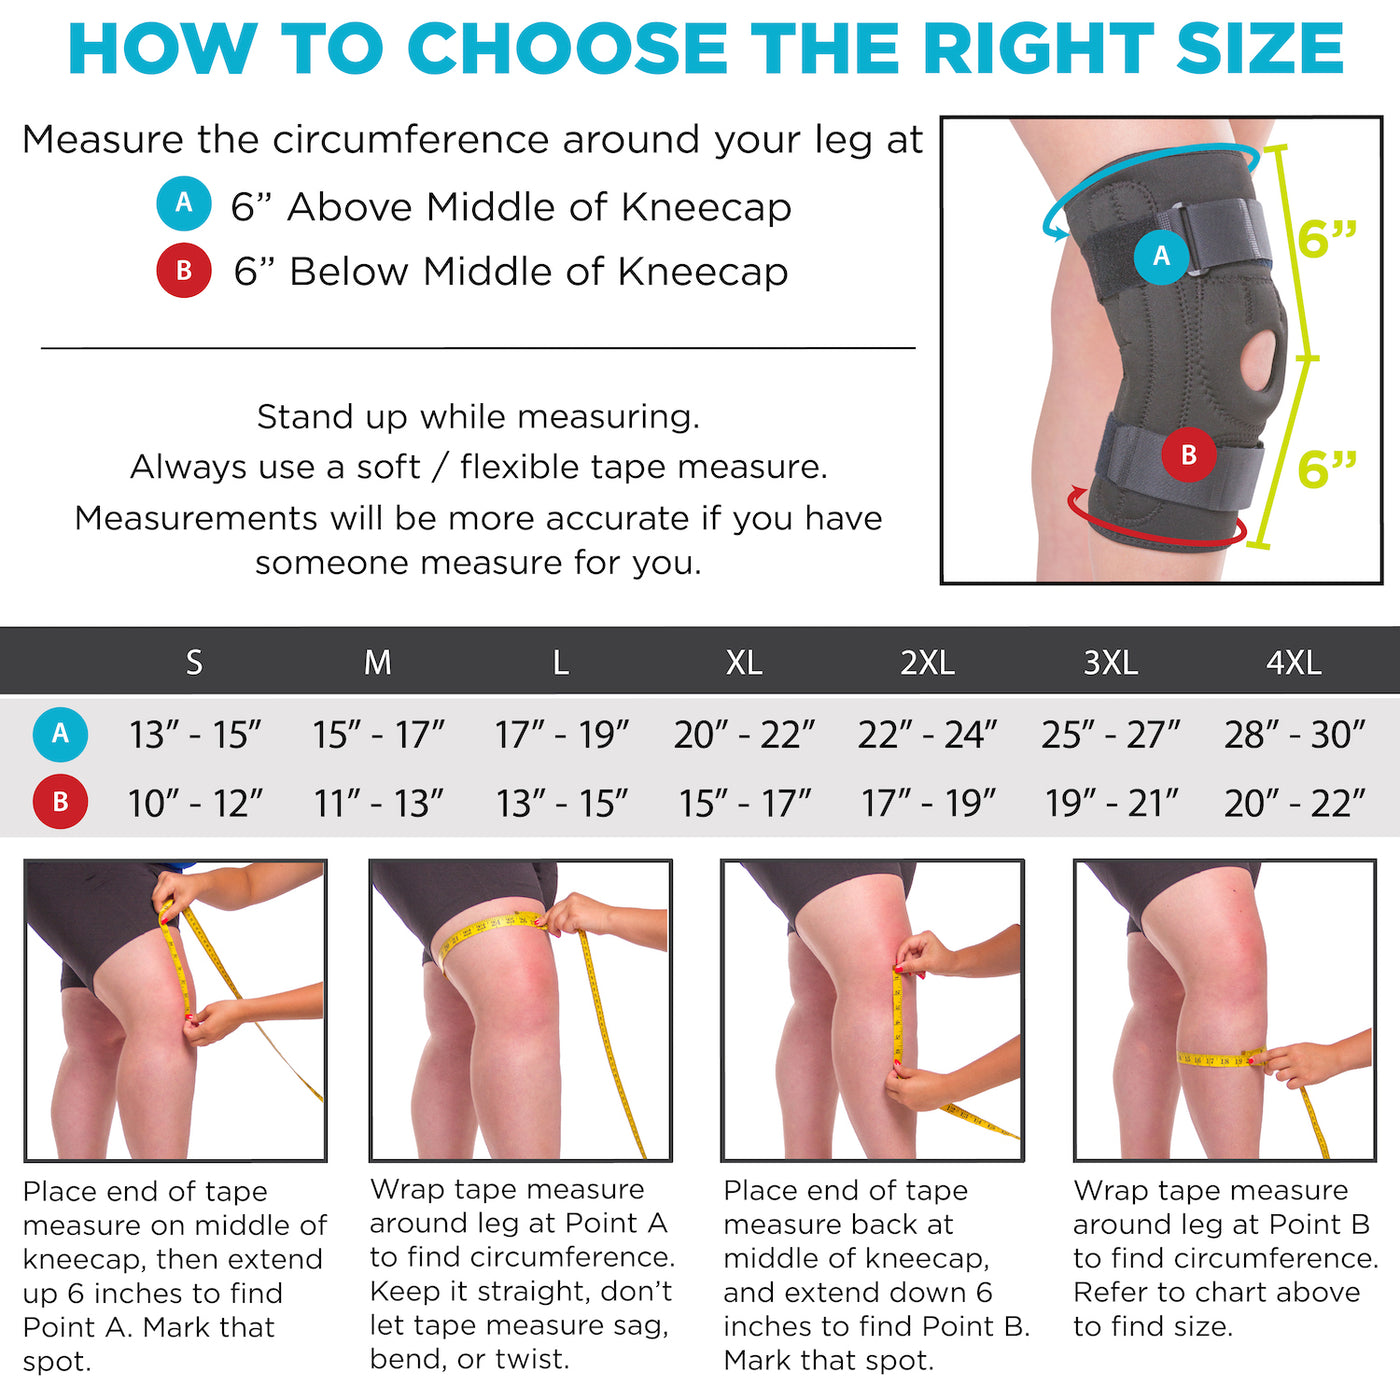 the sizing for the patellar stabilizing knee brace ranges from small through 4xl